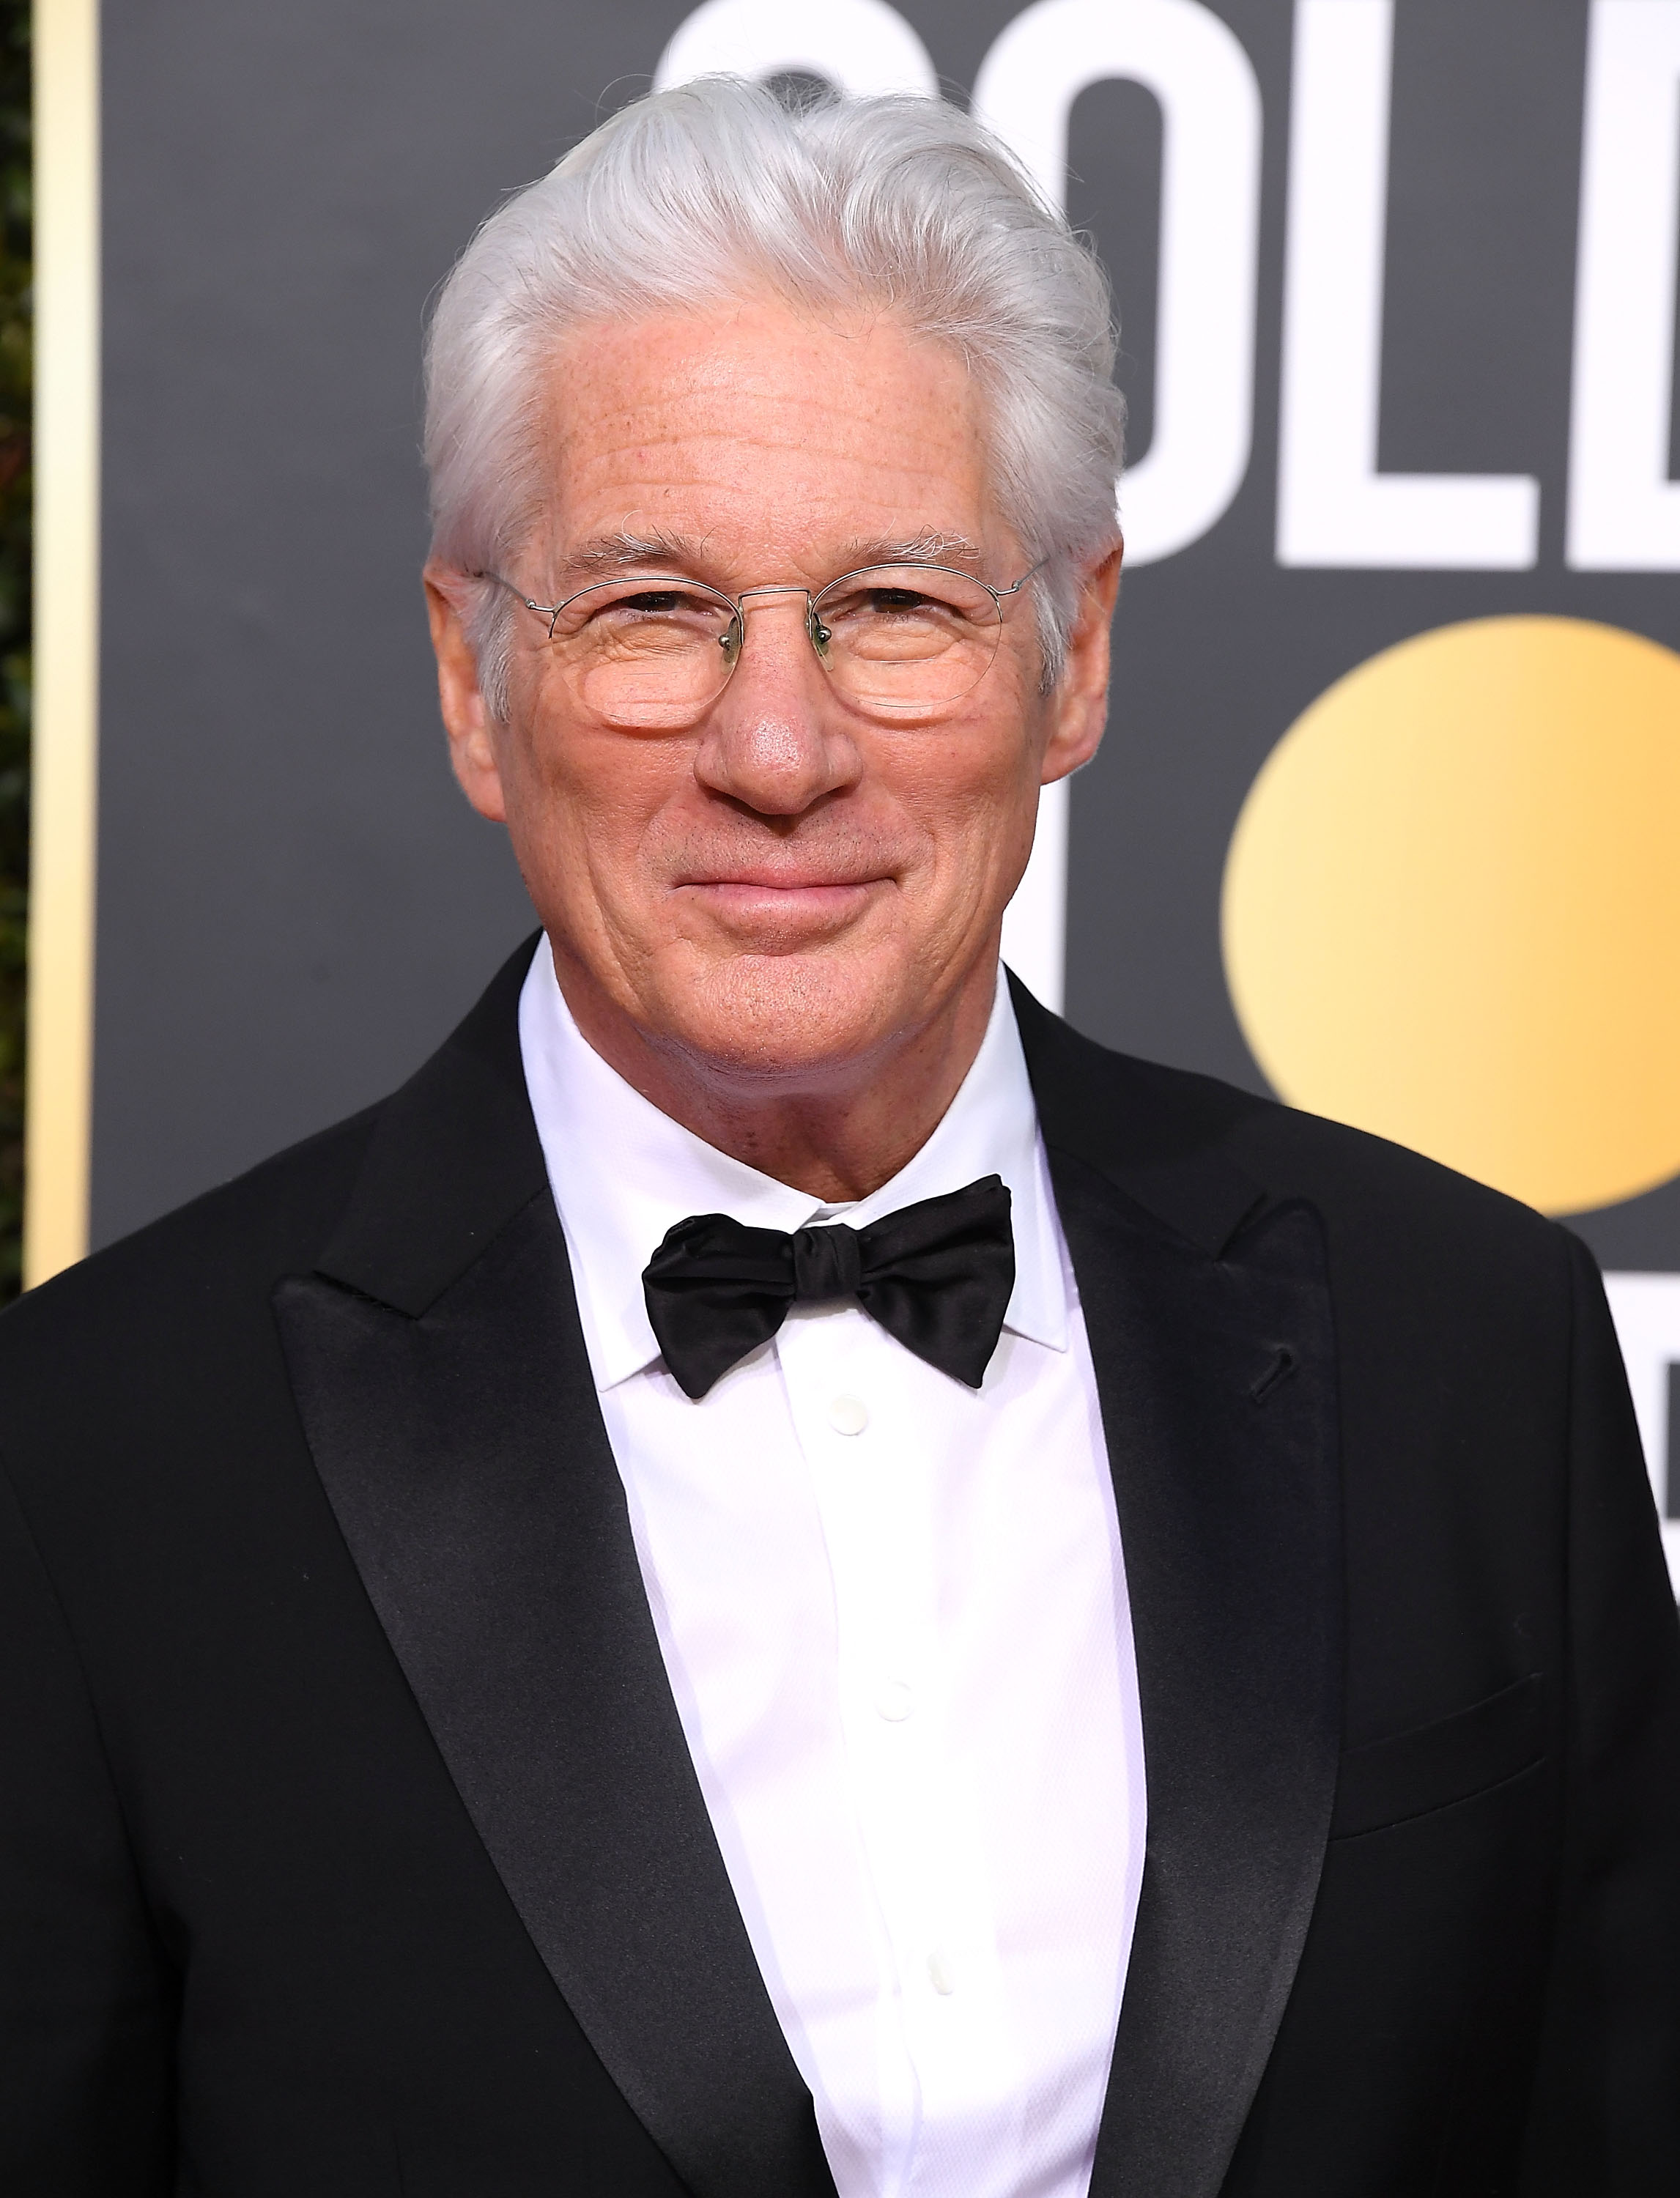 Richard Gere at the 76th Annual Golden Globe Awards in Beverly Hills, California on January 6, 2019 | Source: Getty Images